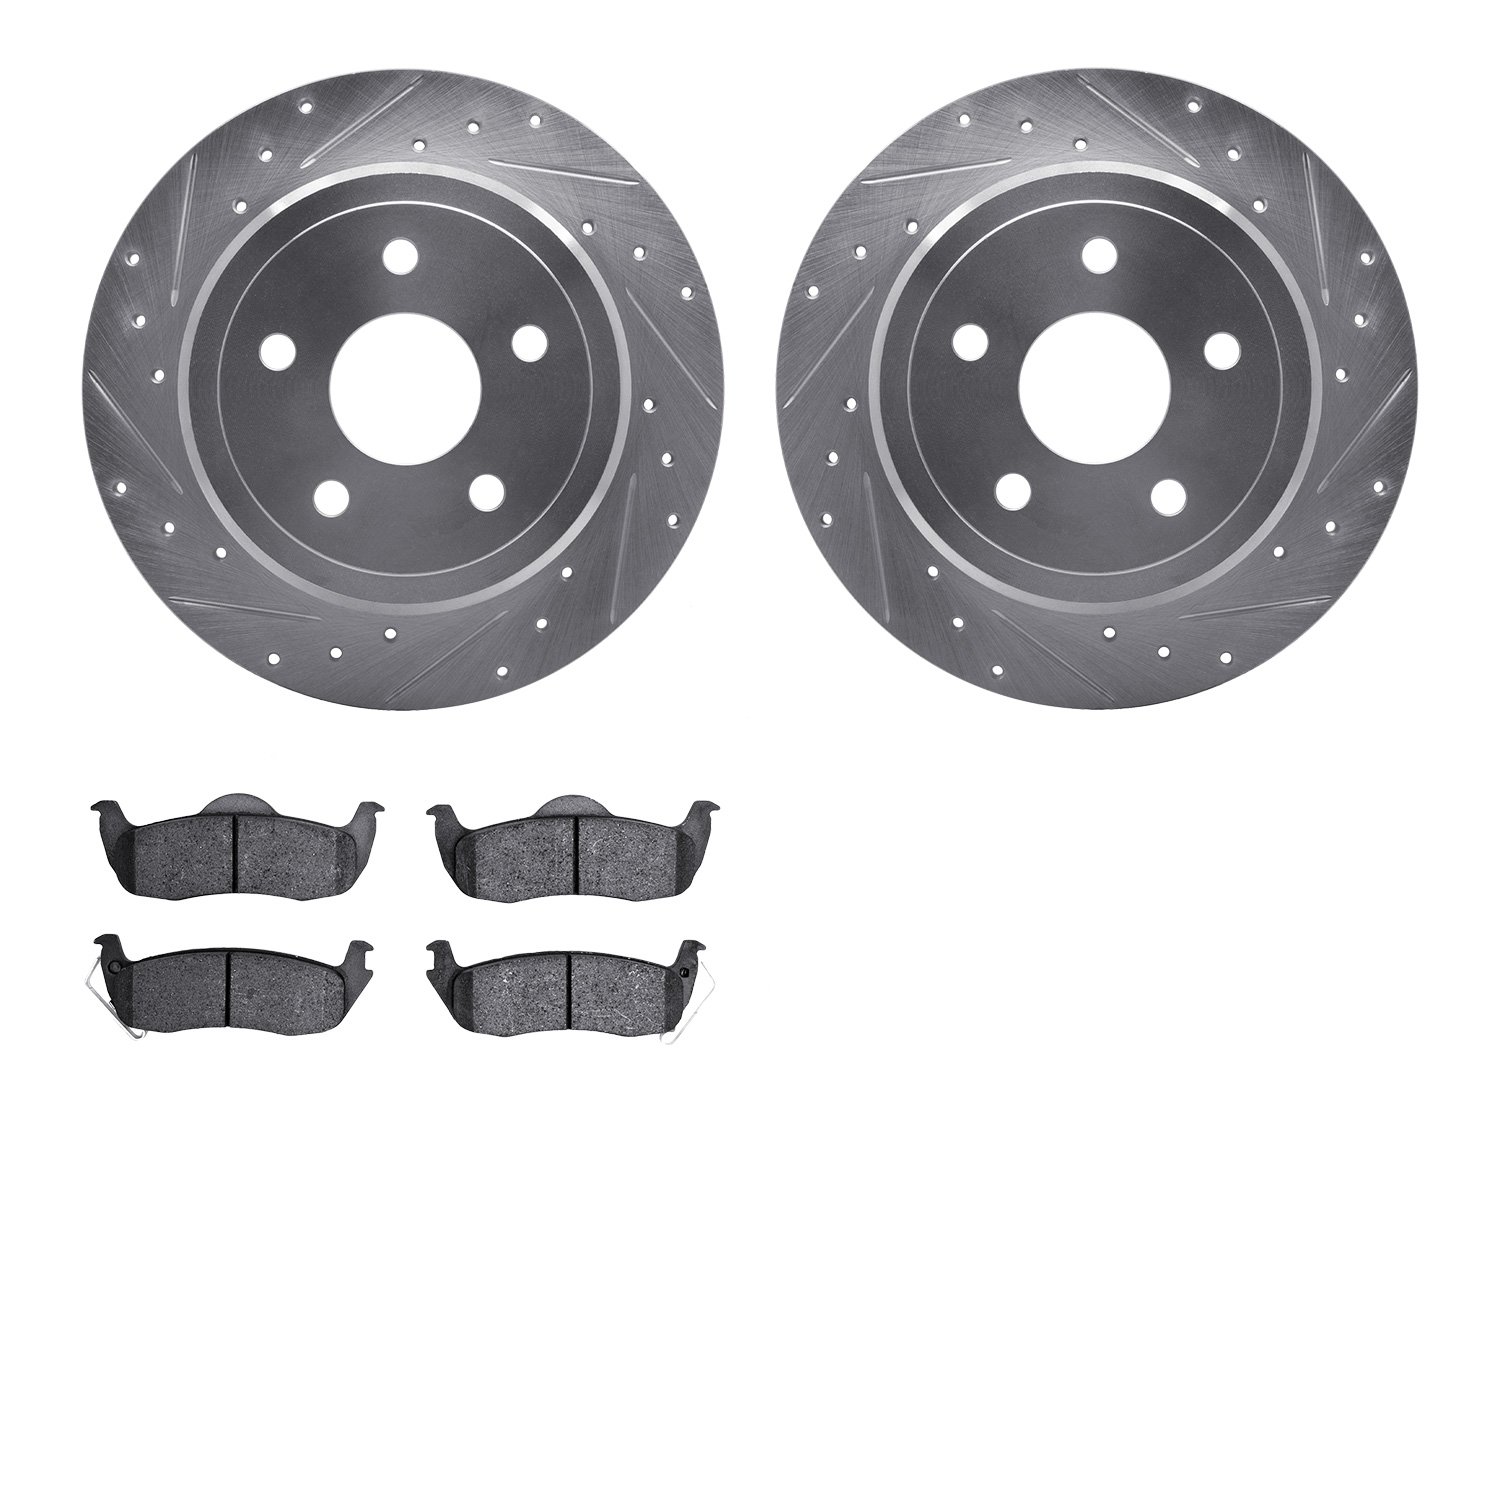 7402-42002 Drilled/Slotted Brake Rotors with Ultimate-Duty Brake Pads Kit [Silver], 2005-2010 Mopar, Position: Rear